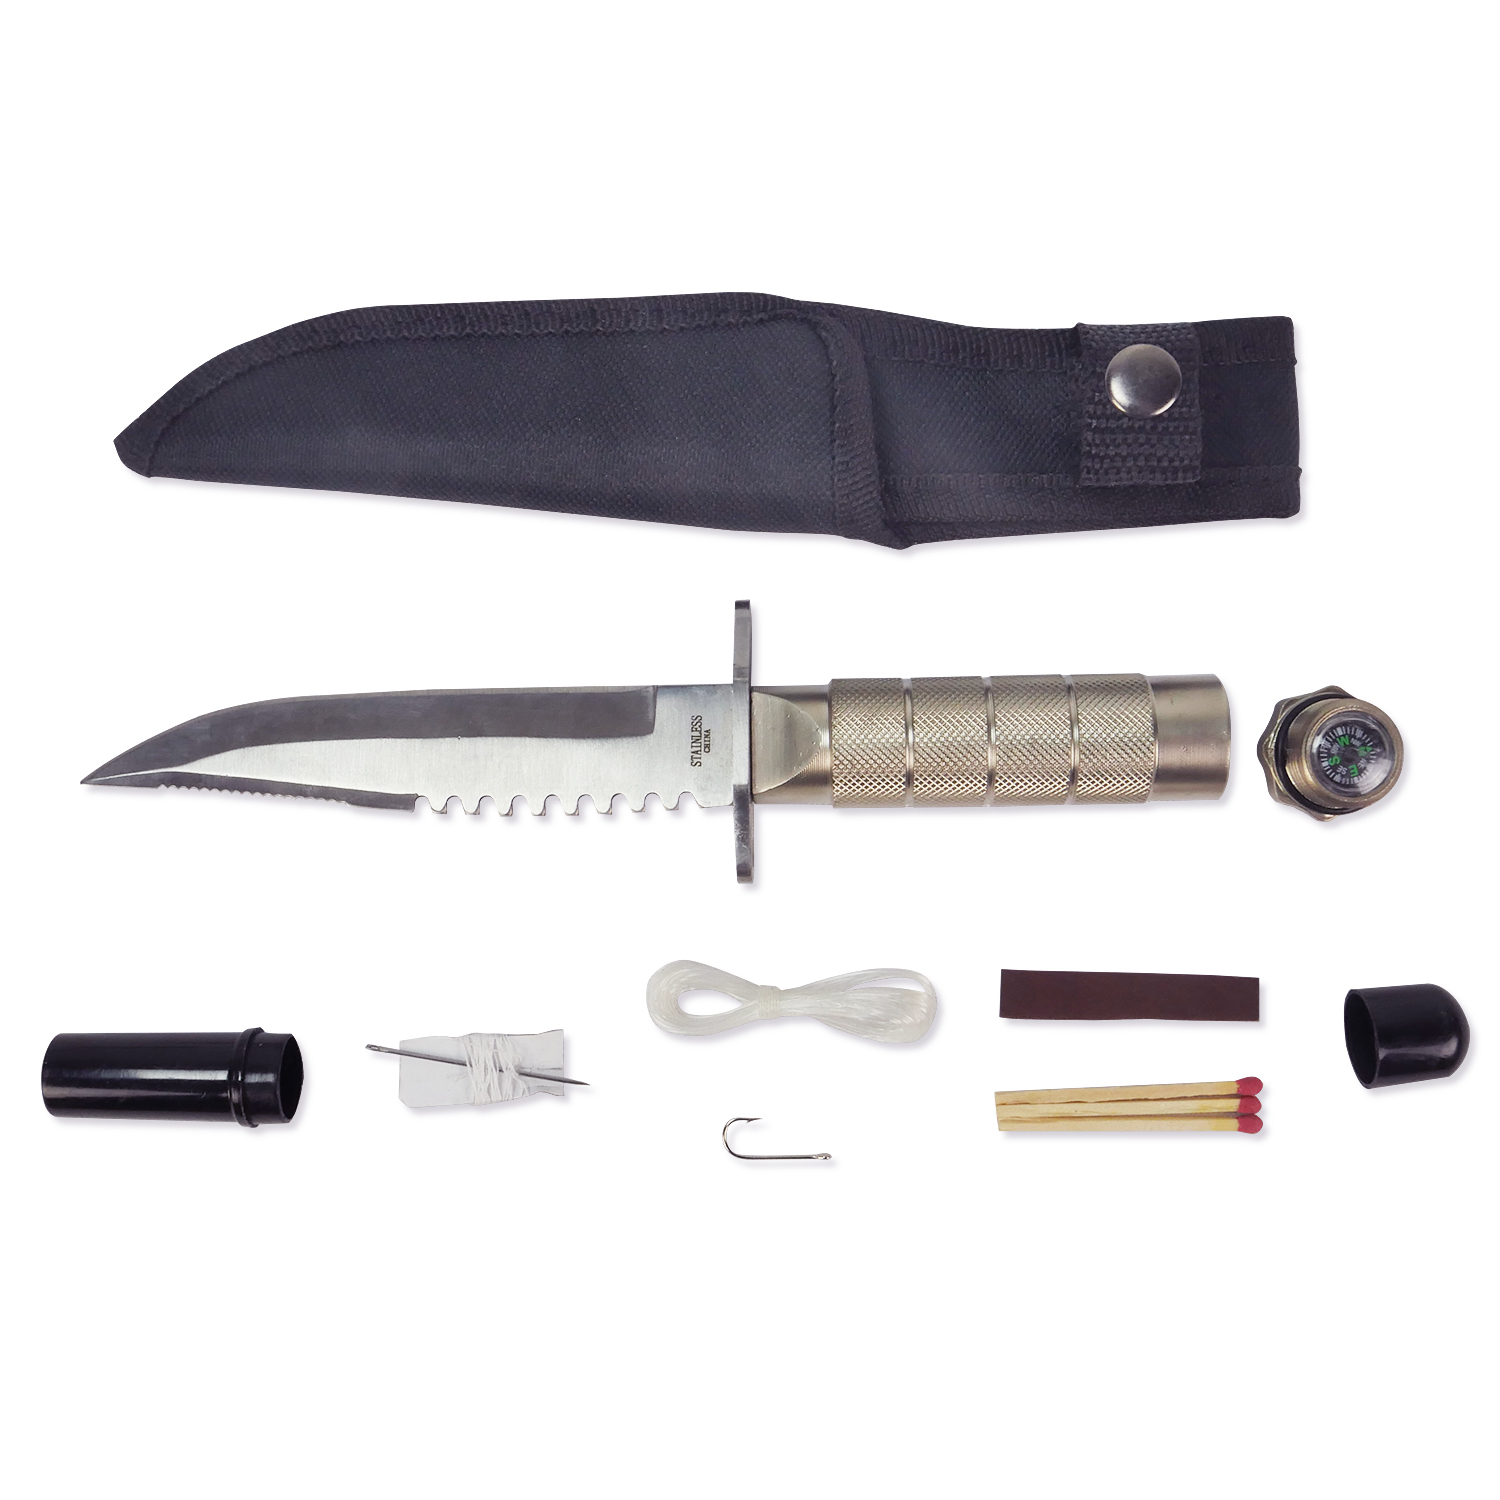 Details about   8" Survival/Hunting Knife Sewing Kit/Fishing Line/Hook/Compass/Matches/Flint 